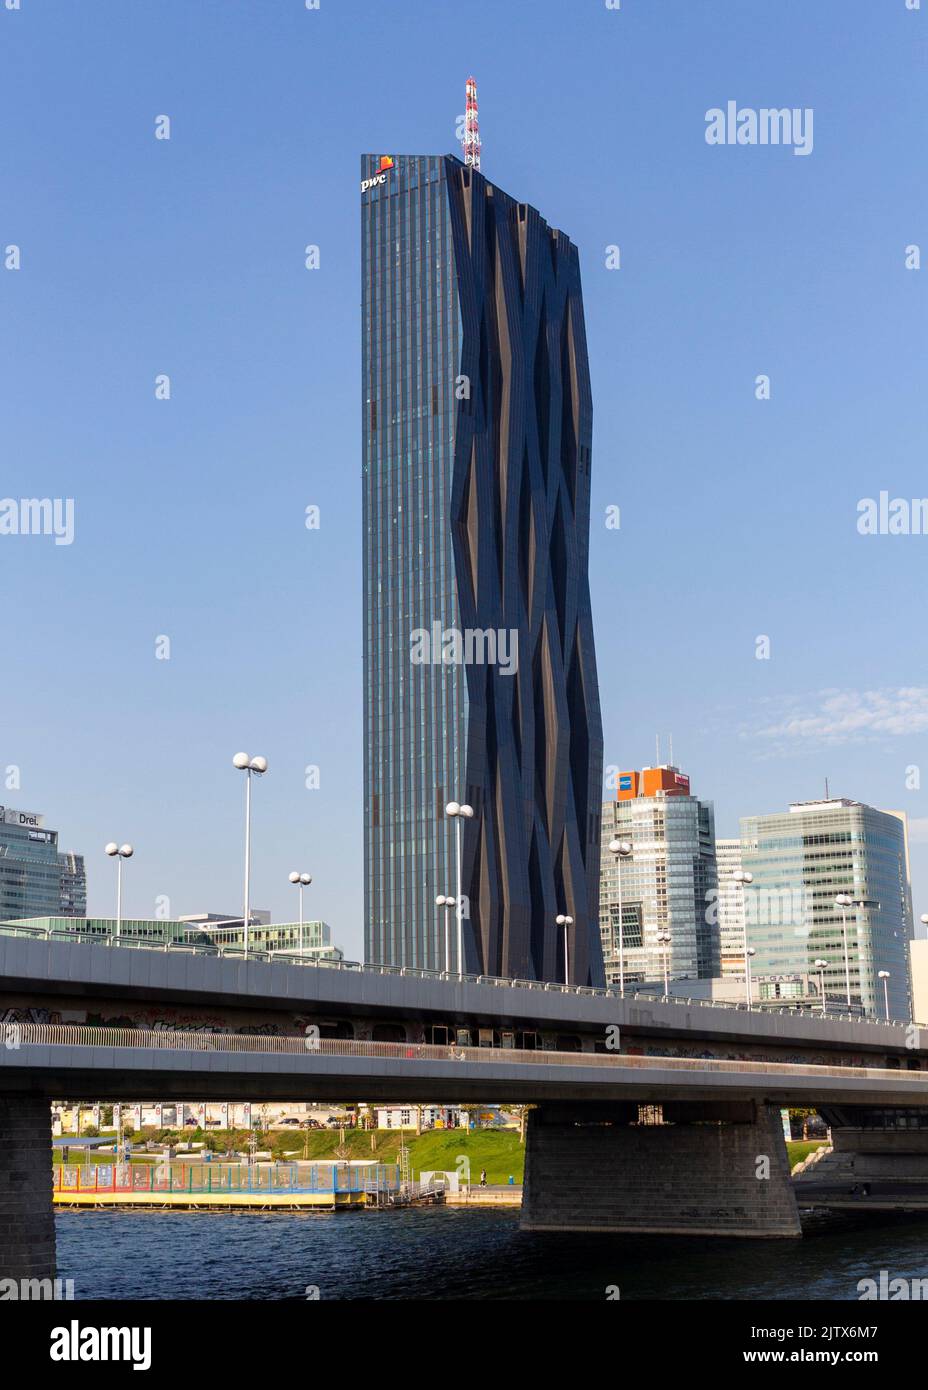 VIENNA, AUSTRIA: DC Tower Skyscraper in the Donaucity District is the highest corporate skyscraper in Vienna. Was built in 2013 by architect Stock Photo